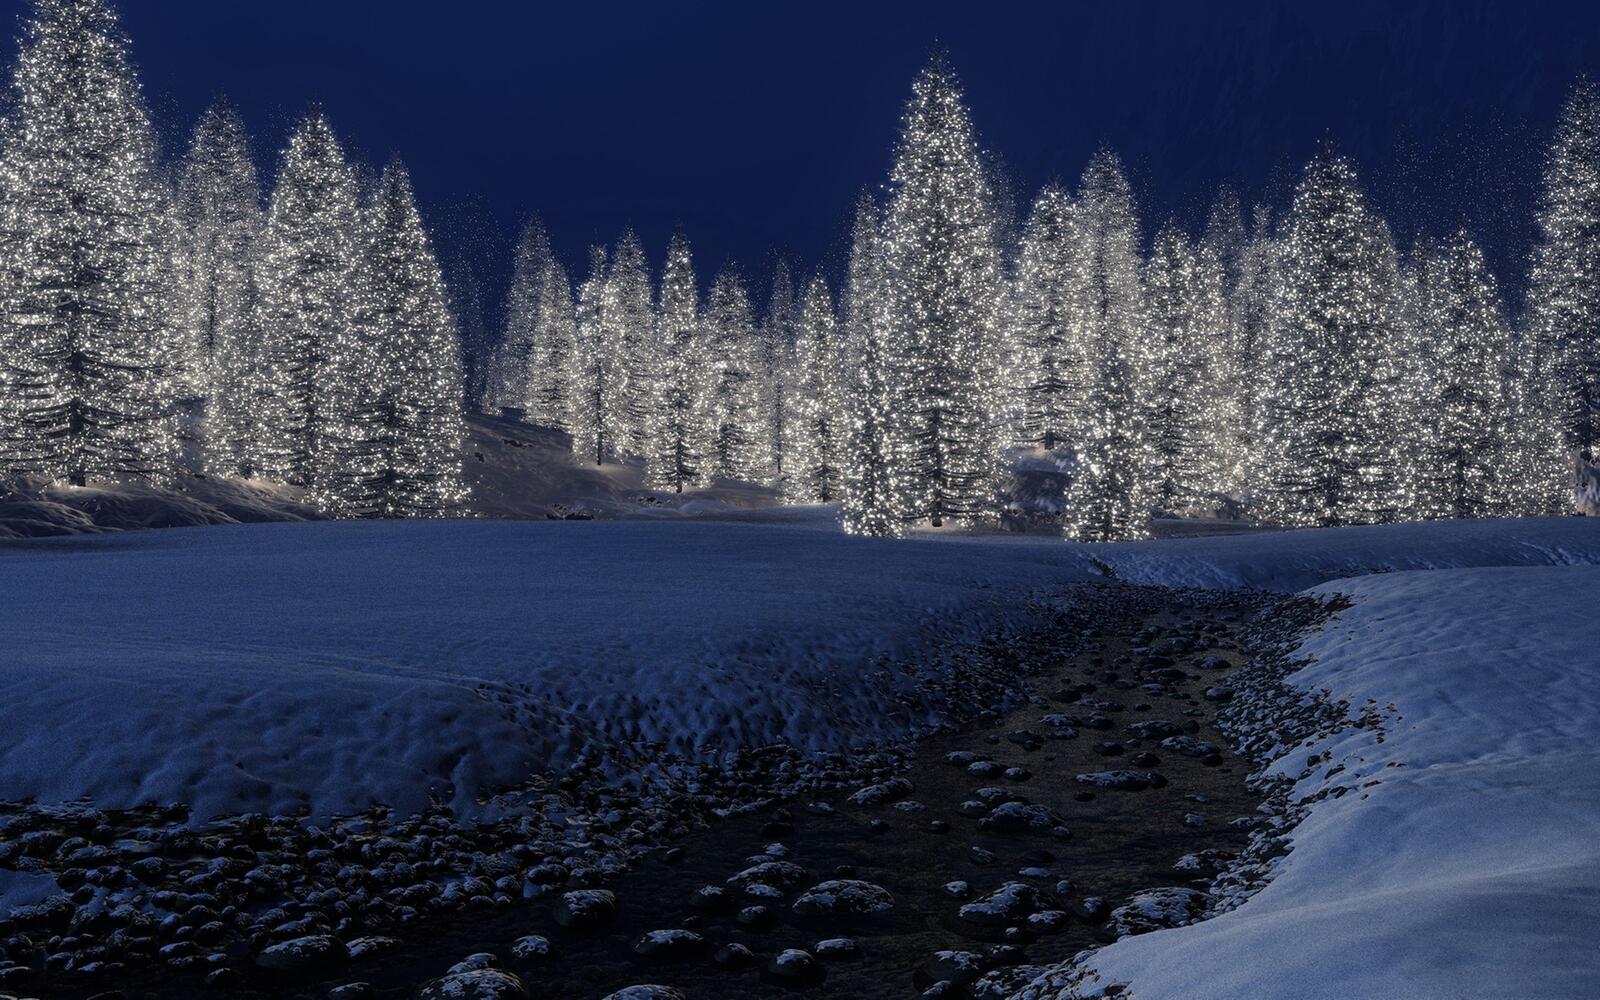 A big forest with glowing Christmas trees.